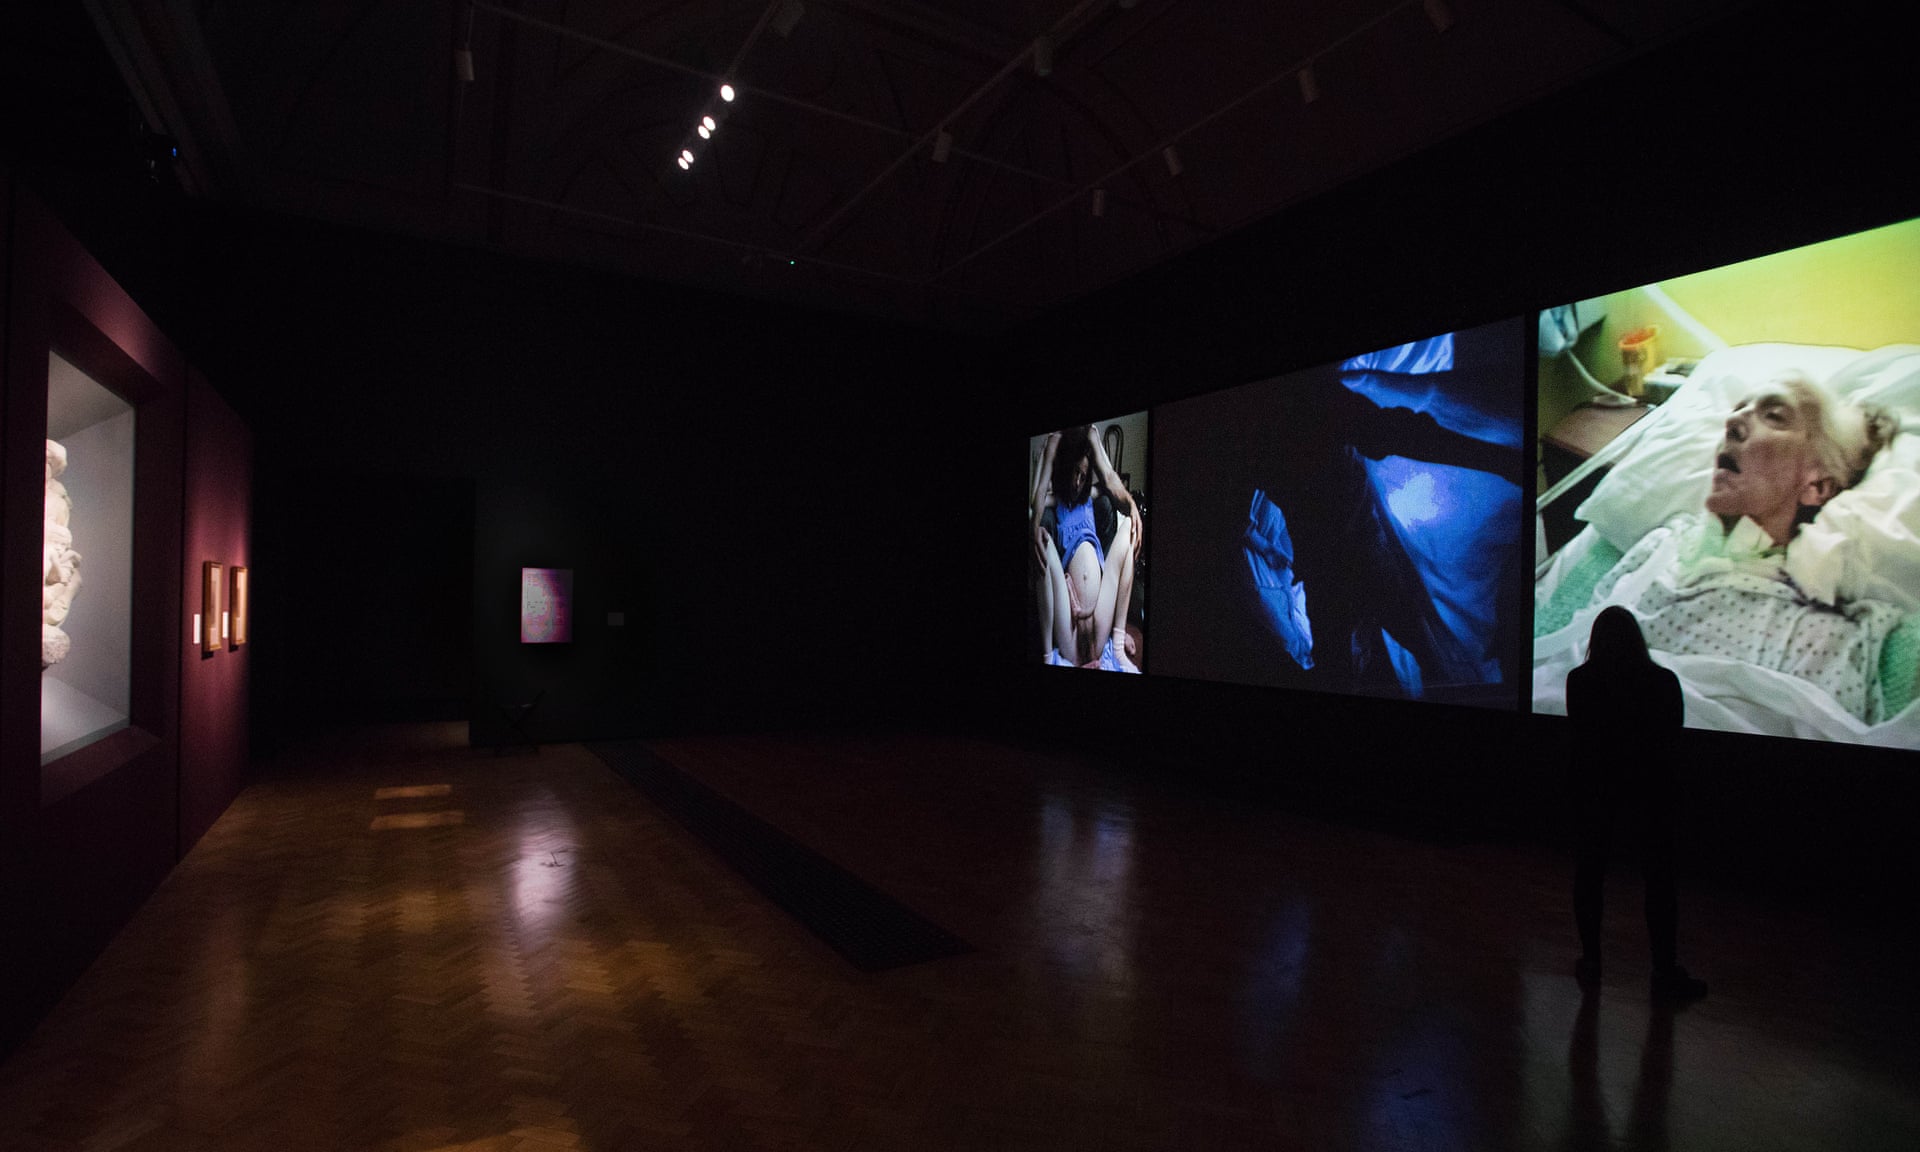 Bill Viola’s Nantes Triptych, 1992, right, opposite Michelangelo’s Taddei Tondo at the Royal Academy. Photograph: David Parry © Royal Academy of Arts